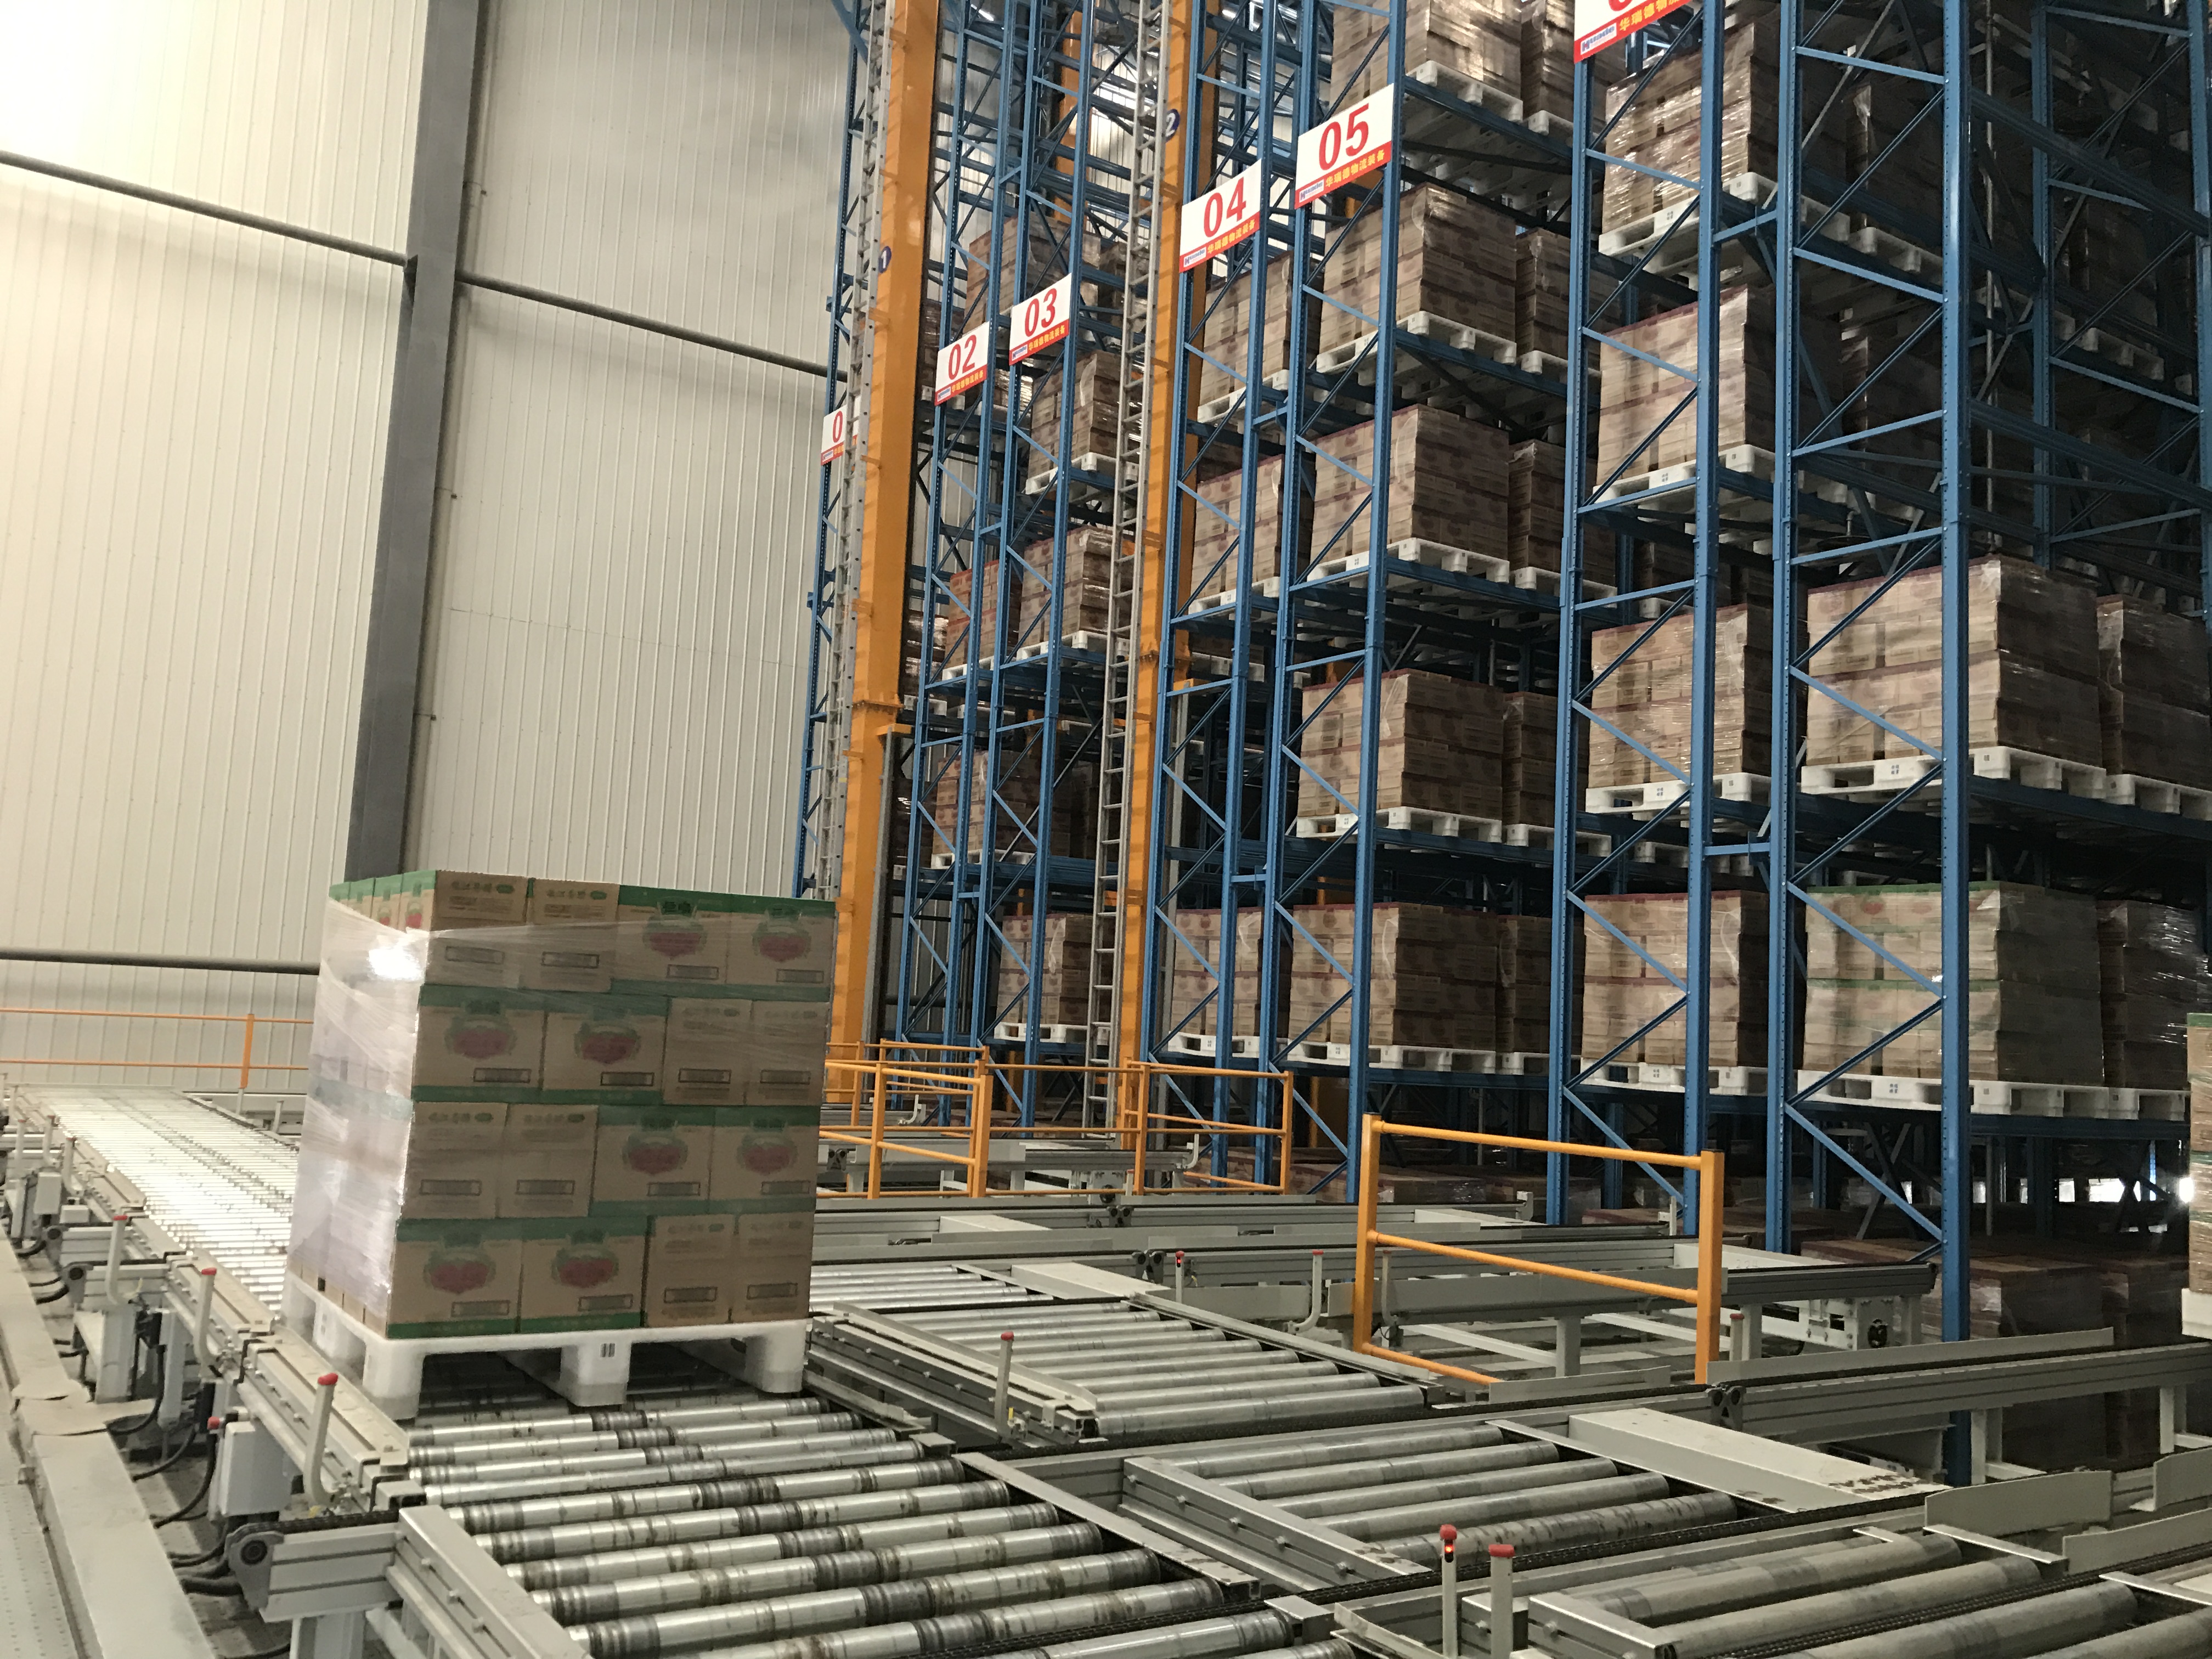 Why  should use plastic pallet, not wooden for ASRS?